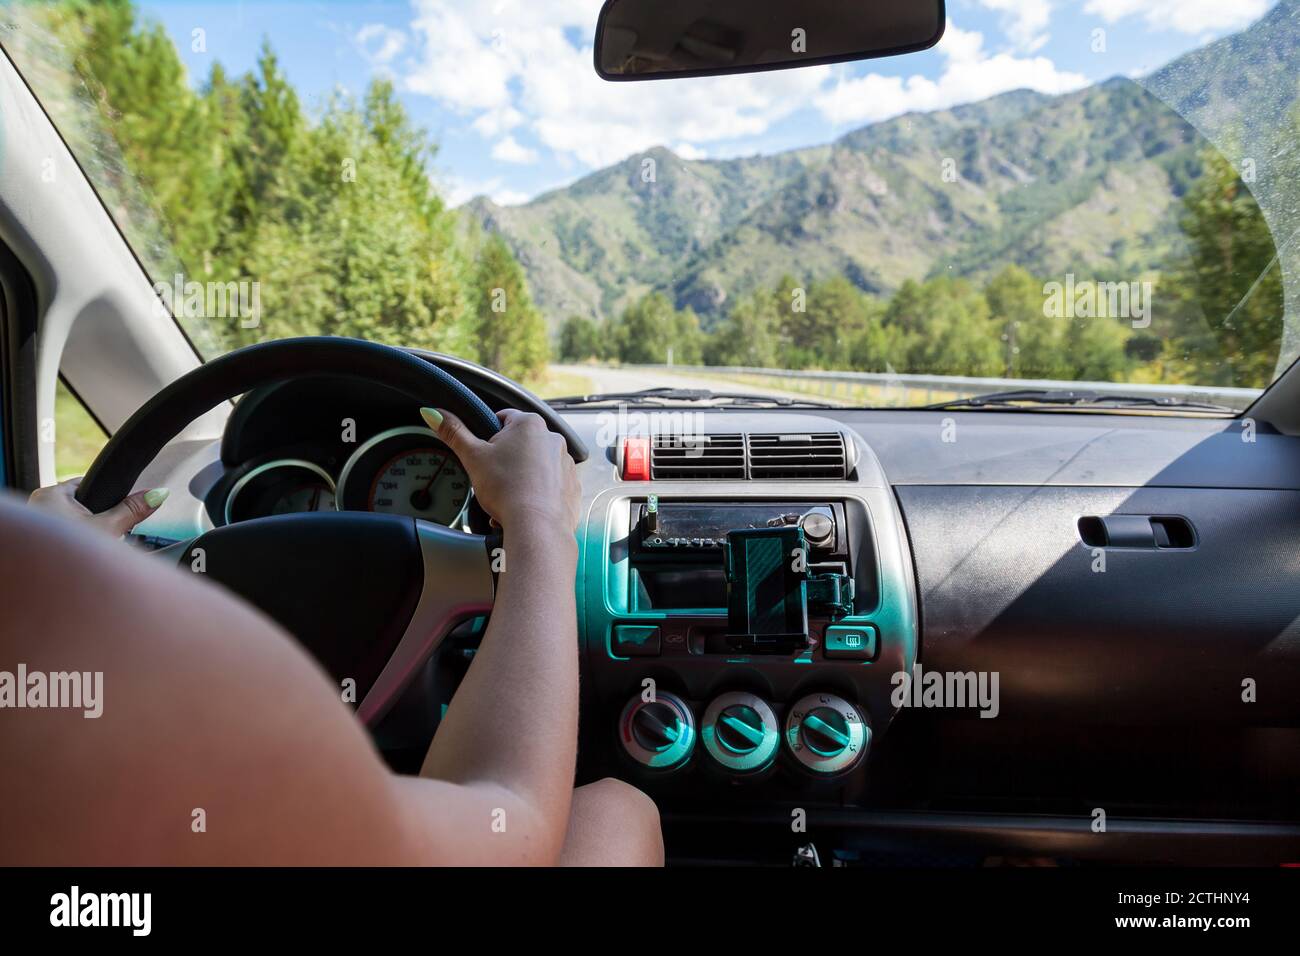 Women's hands behind the wheel of a Japanese Honda car with a view of the mountain ranges through the windshield and the serpentine road. Stock Photo